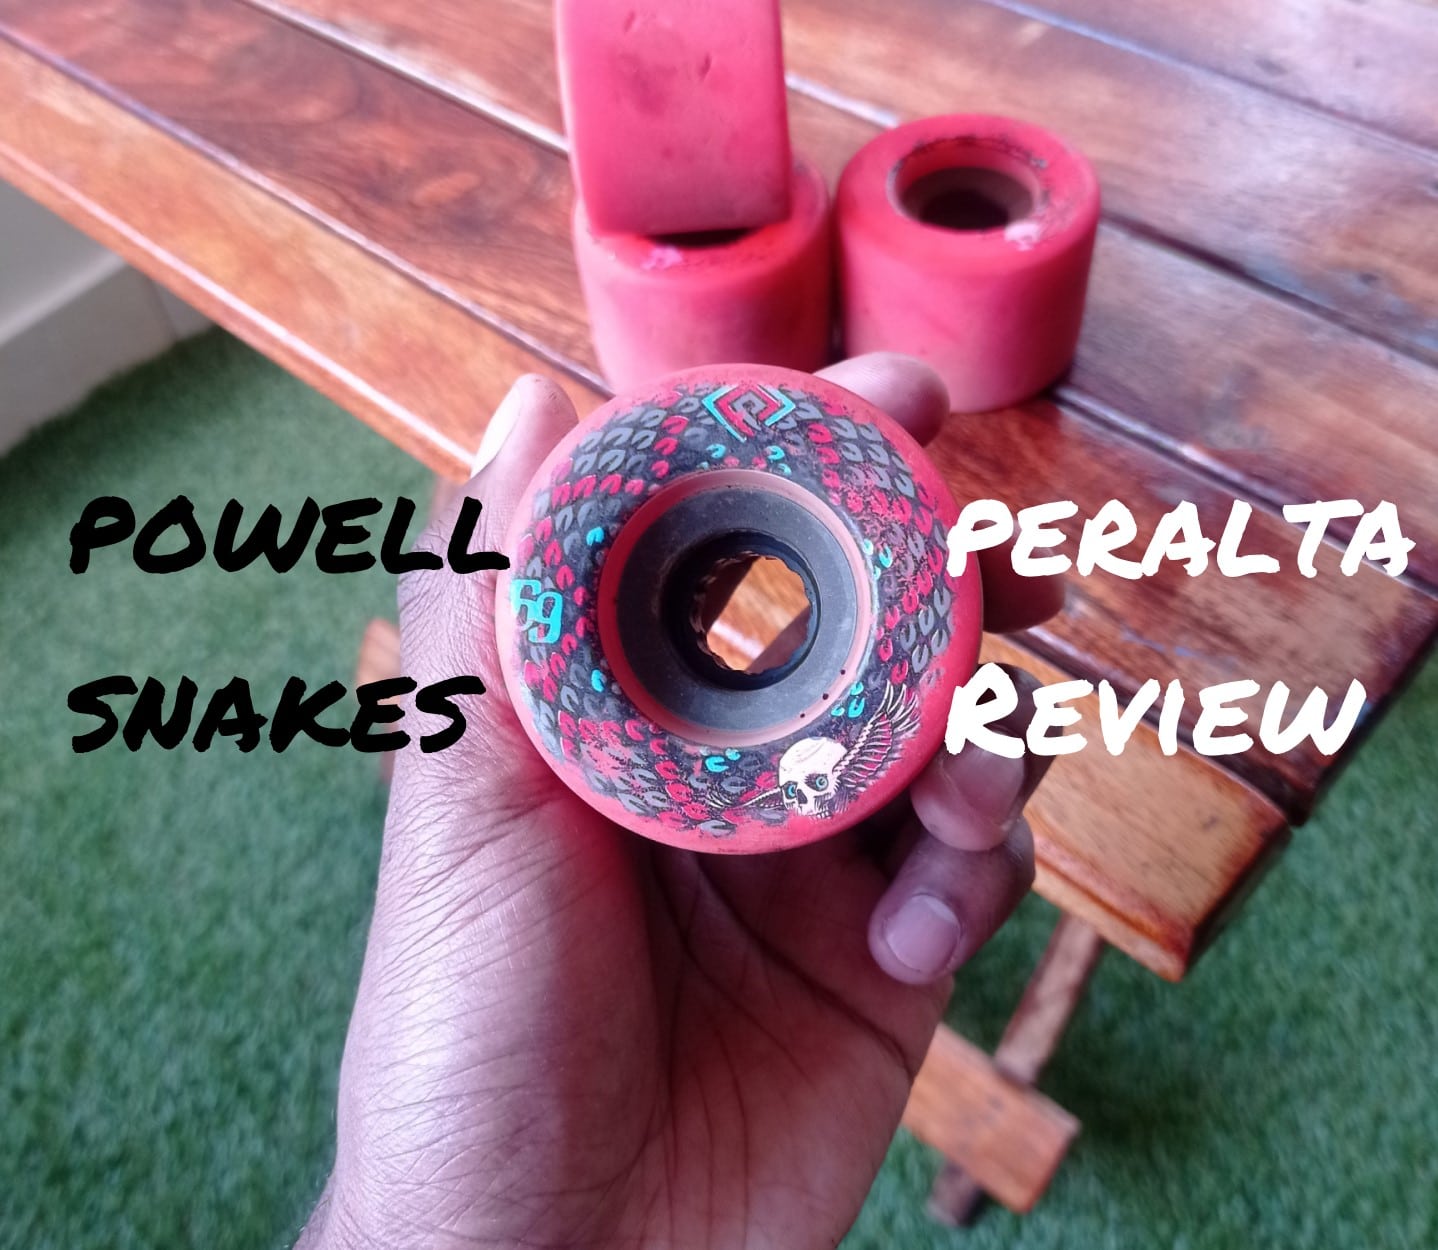 Powell-Peralta Snakes Review - Downhill254